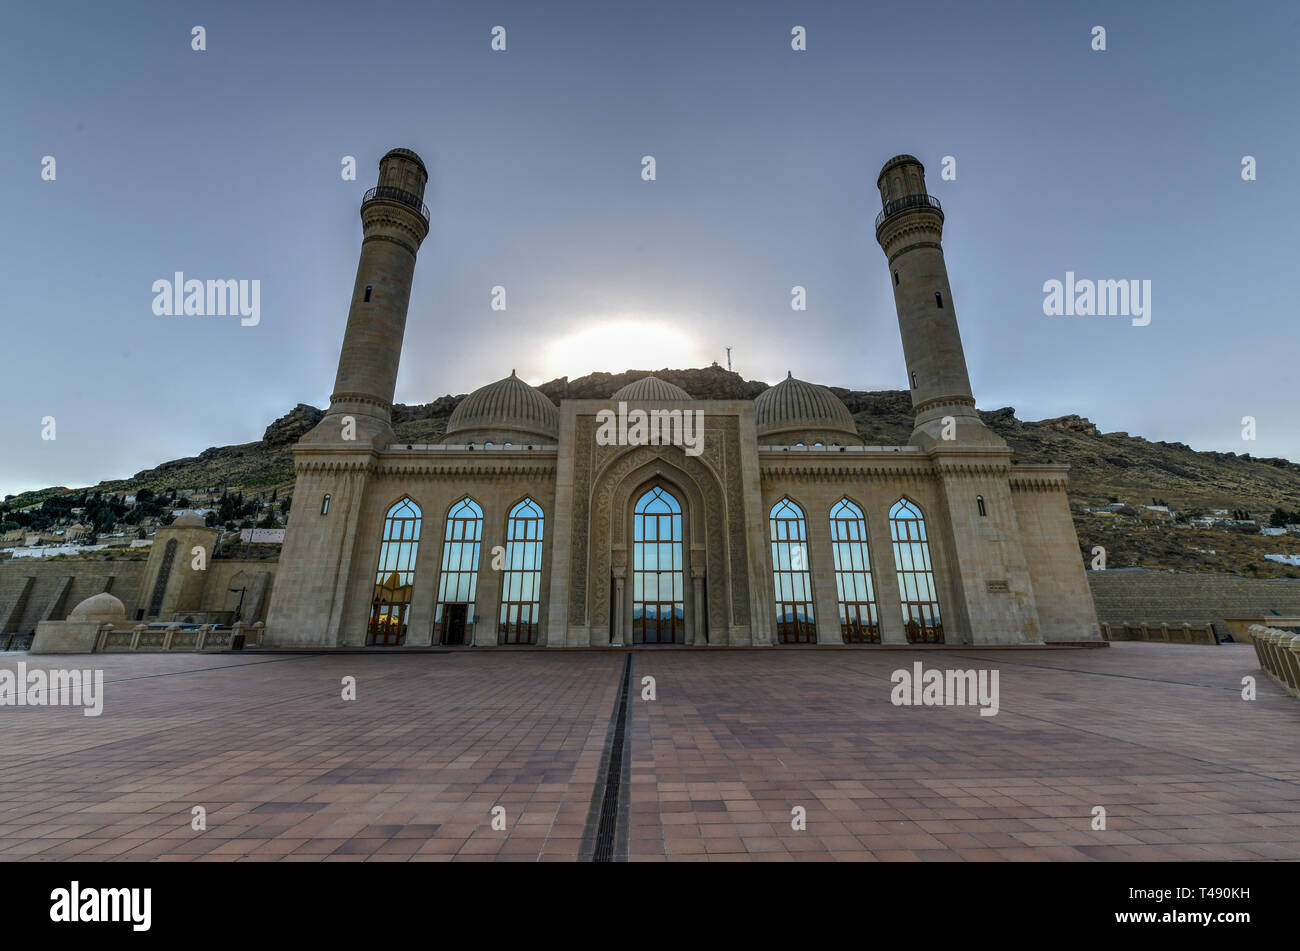 The Bibi-Heybat Mosque is a historical mosque in Baku, Azerbaijan. The existing structure, built in the 1990s, is a recreation of the mosque with the  Stock Photo